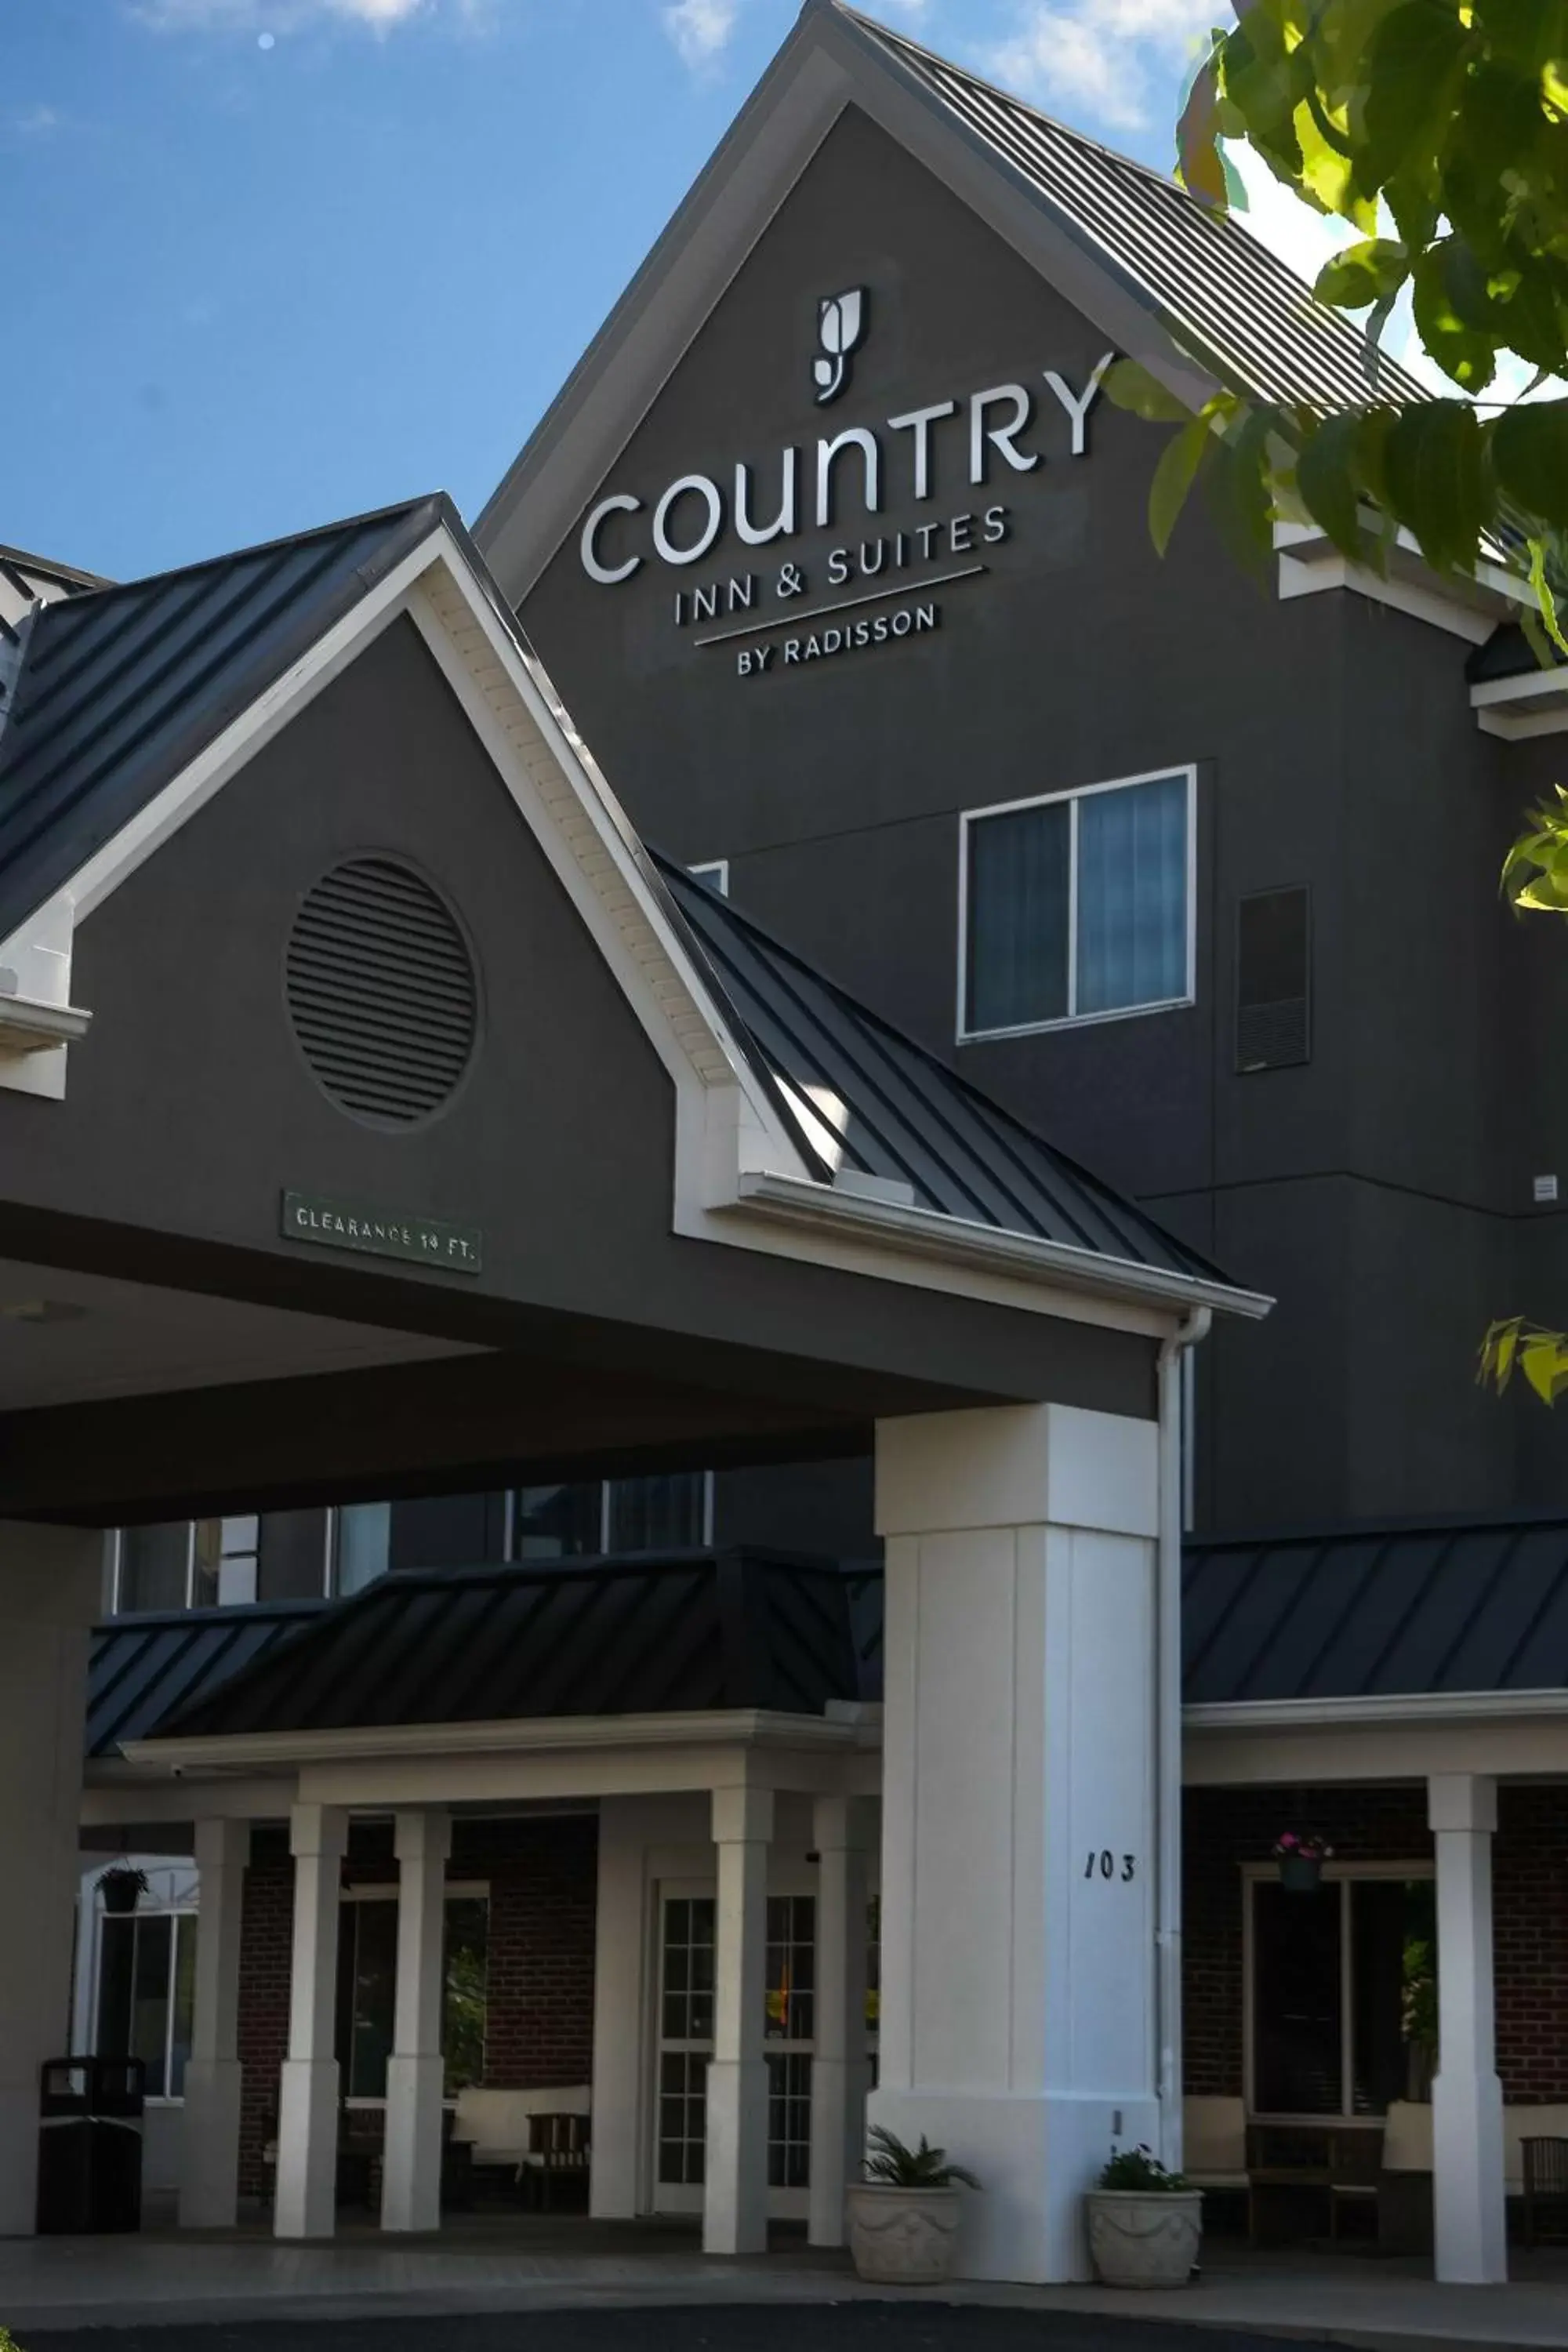 Property Building in Country Inn & Suites by Radisson, Augusta at I-20, GA